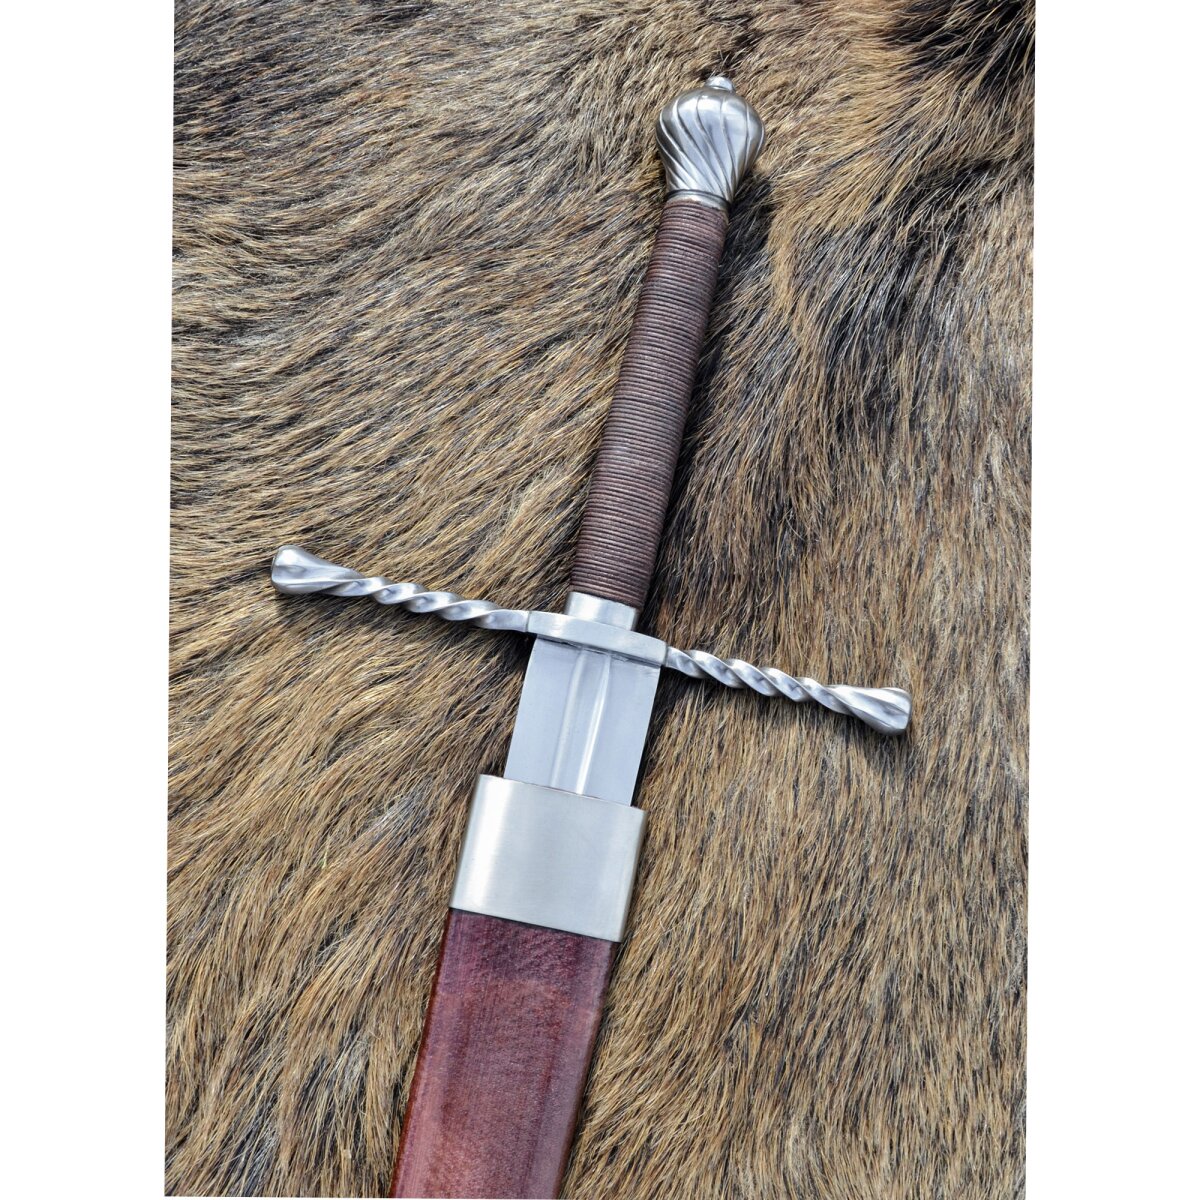 Bastard Sword One And A Half Handed With Scabbard 147 95